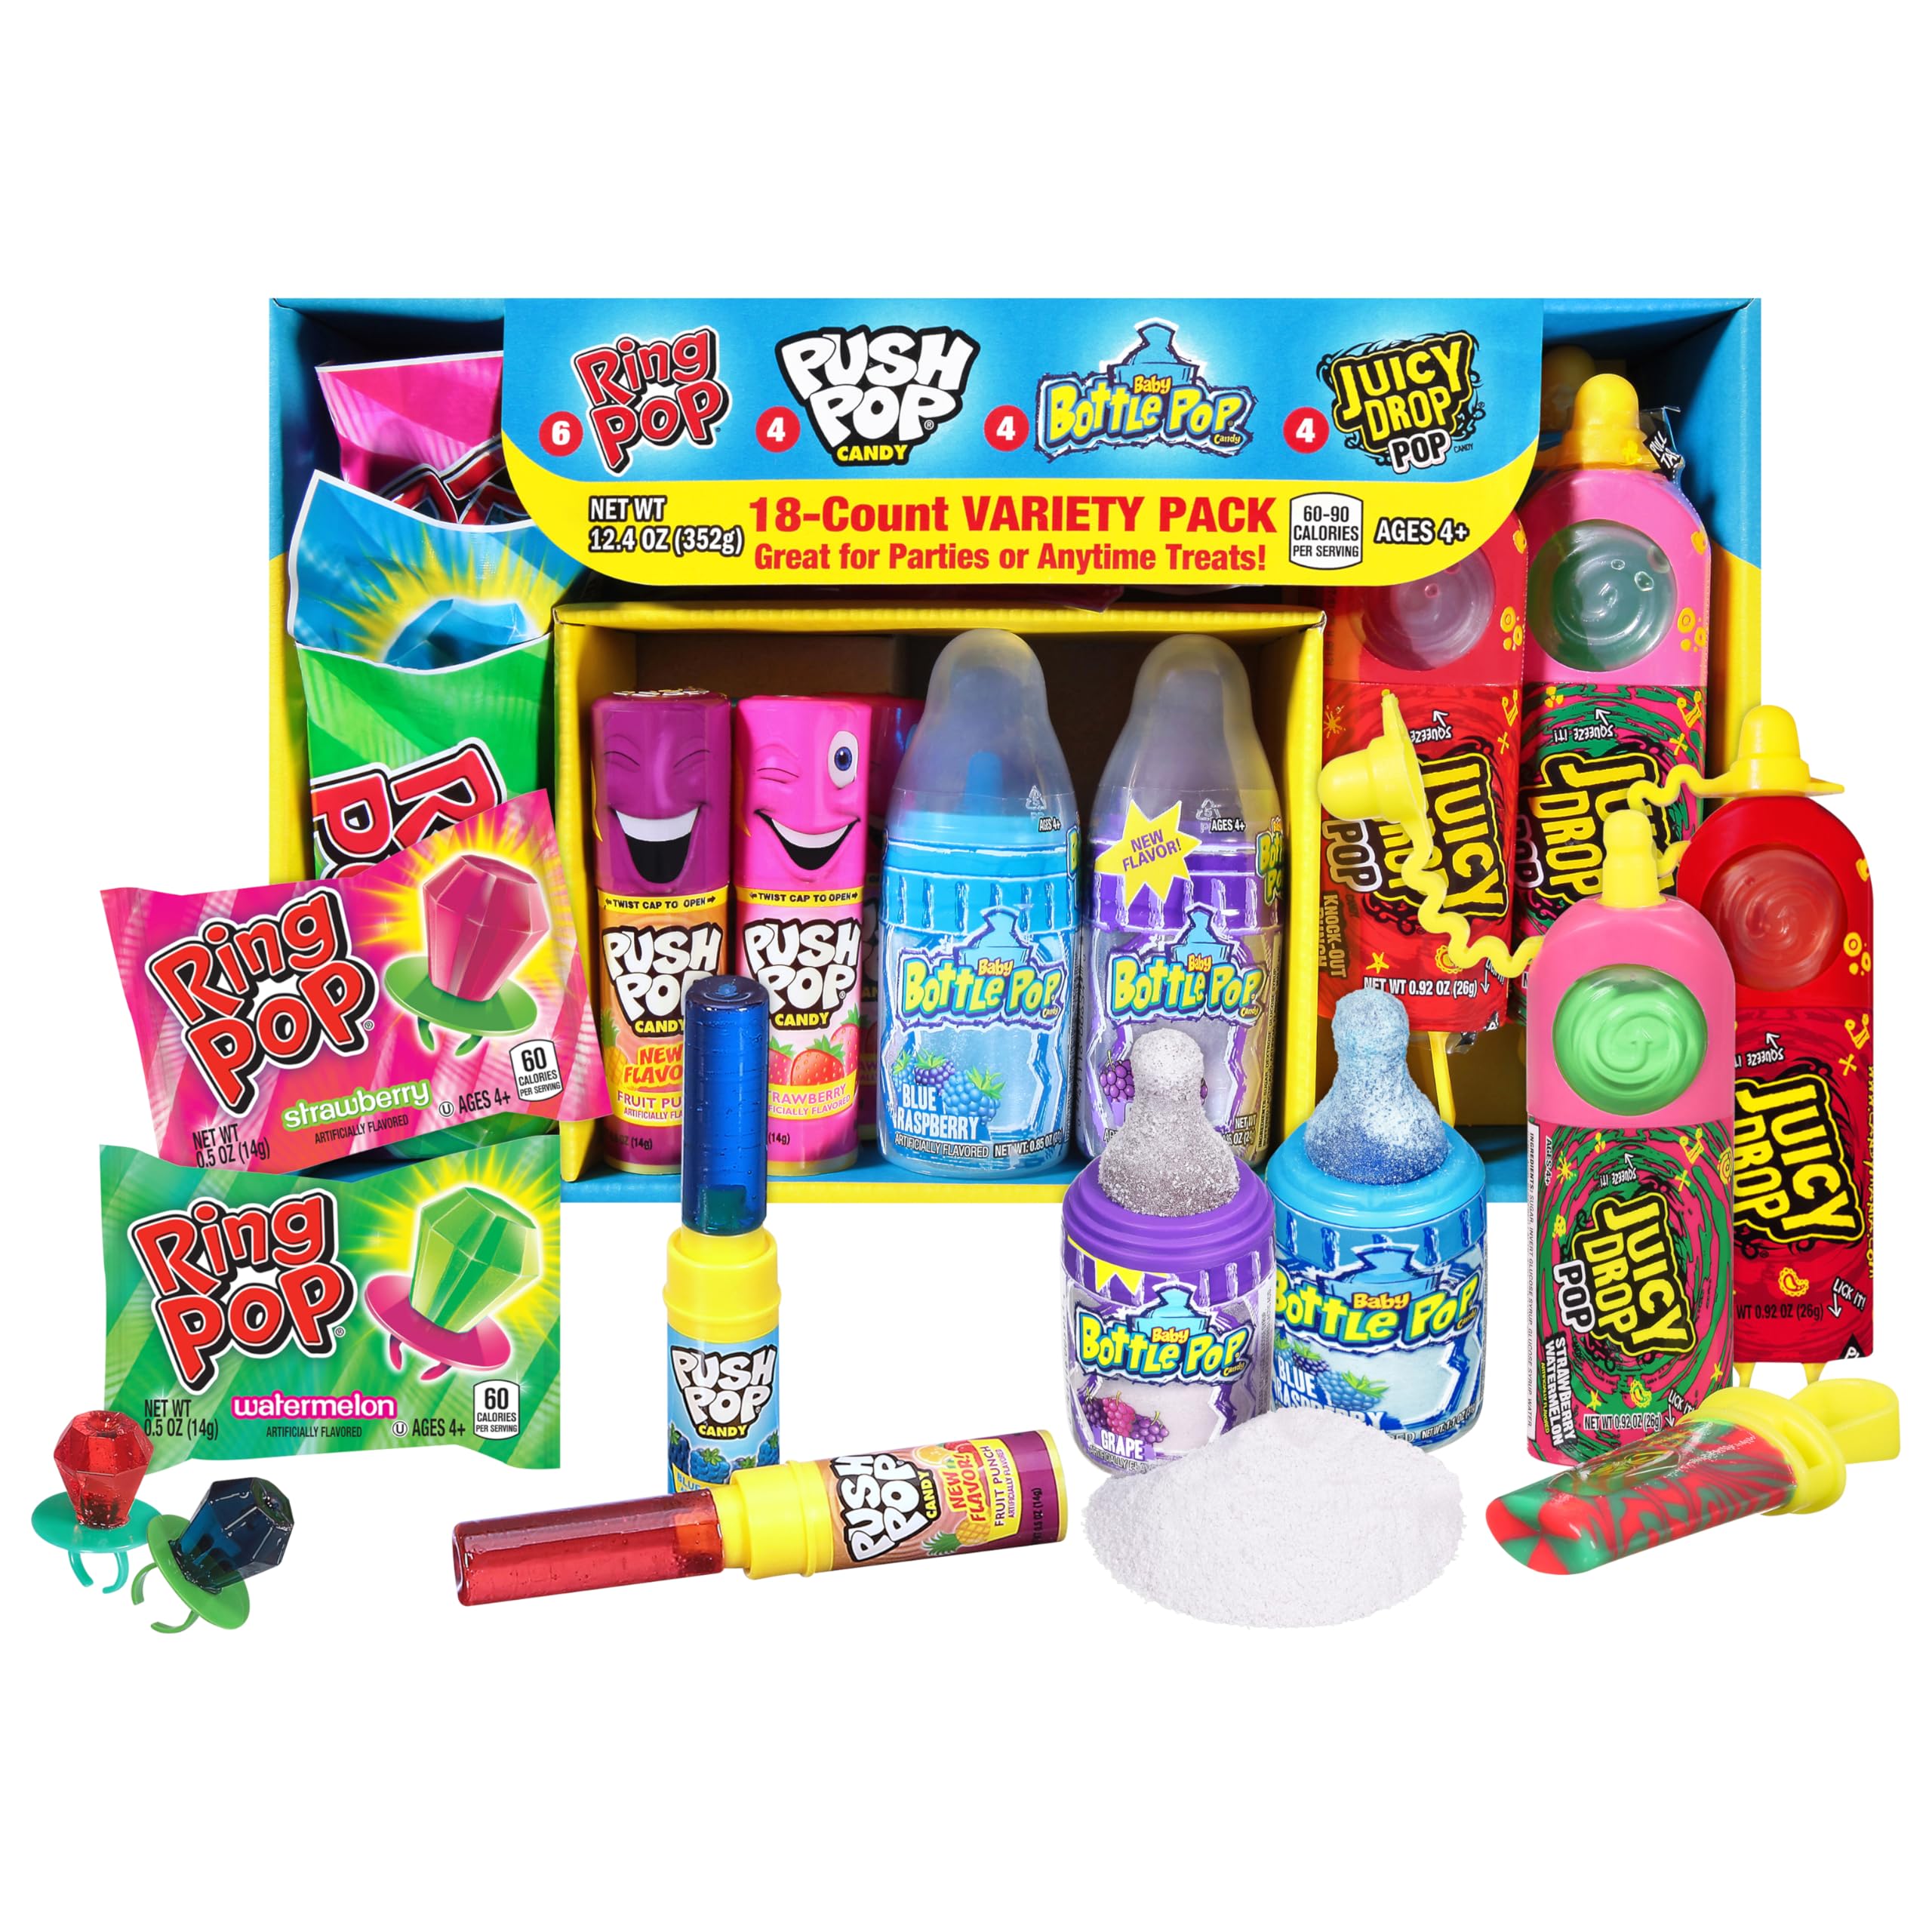 Bazooka Candy Brands Holiday Candy Variety Pack 18 Count:Fun Bulk Candy for Kids from Ring Pop,Push Pop,Baby Bottle Pop&Juicy Drop-Candy Gift Box for Birthdays,Party Favors,Stocking Stuffers